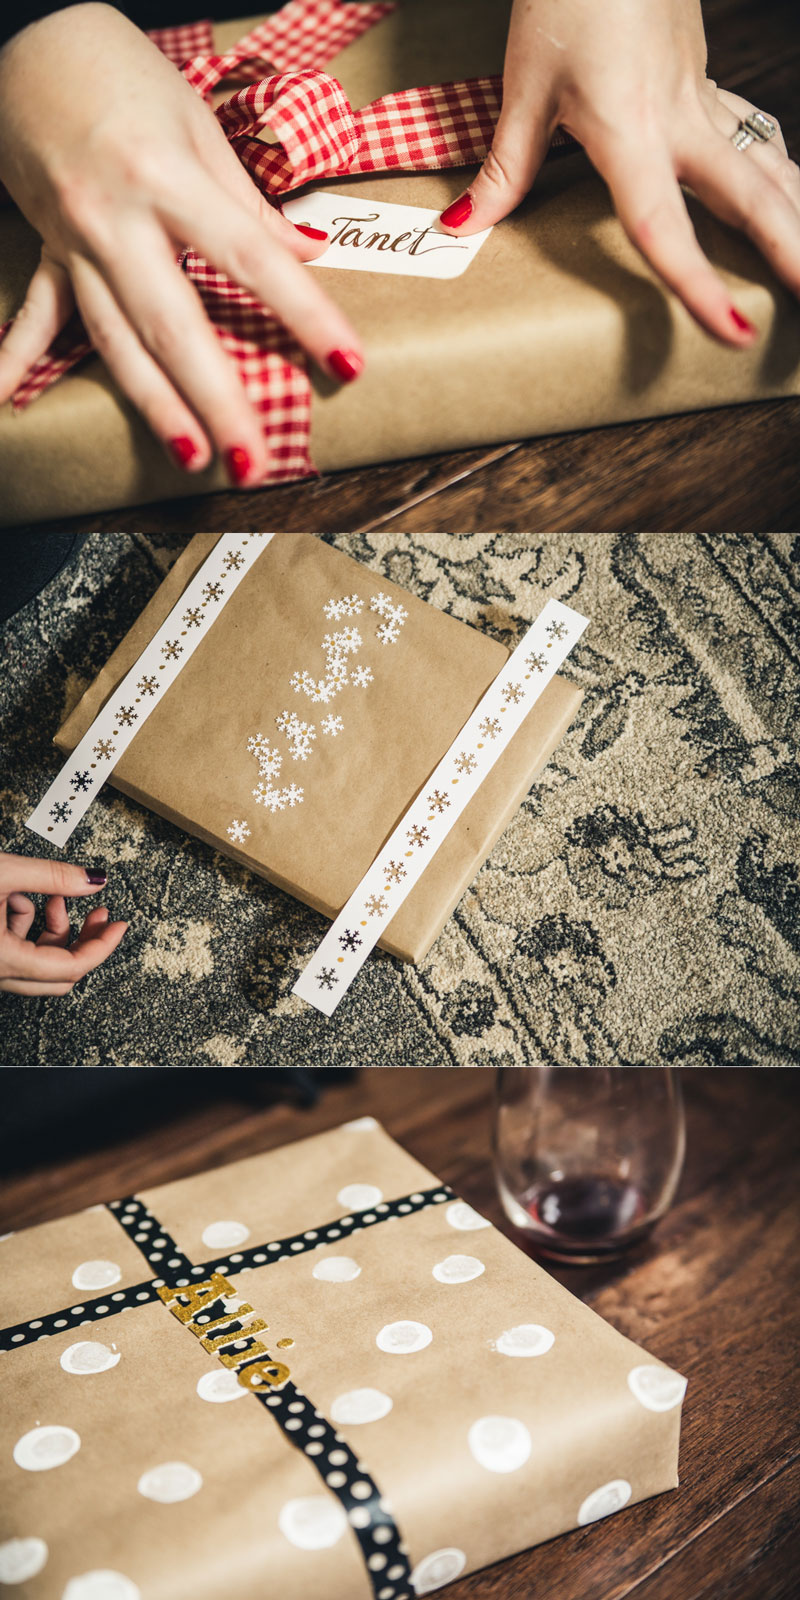 Three fun and festive Black Friday wrapping ideas